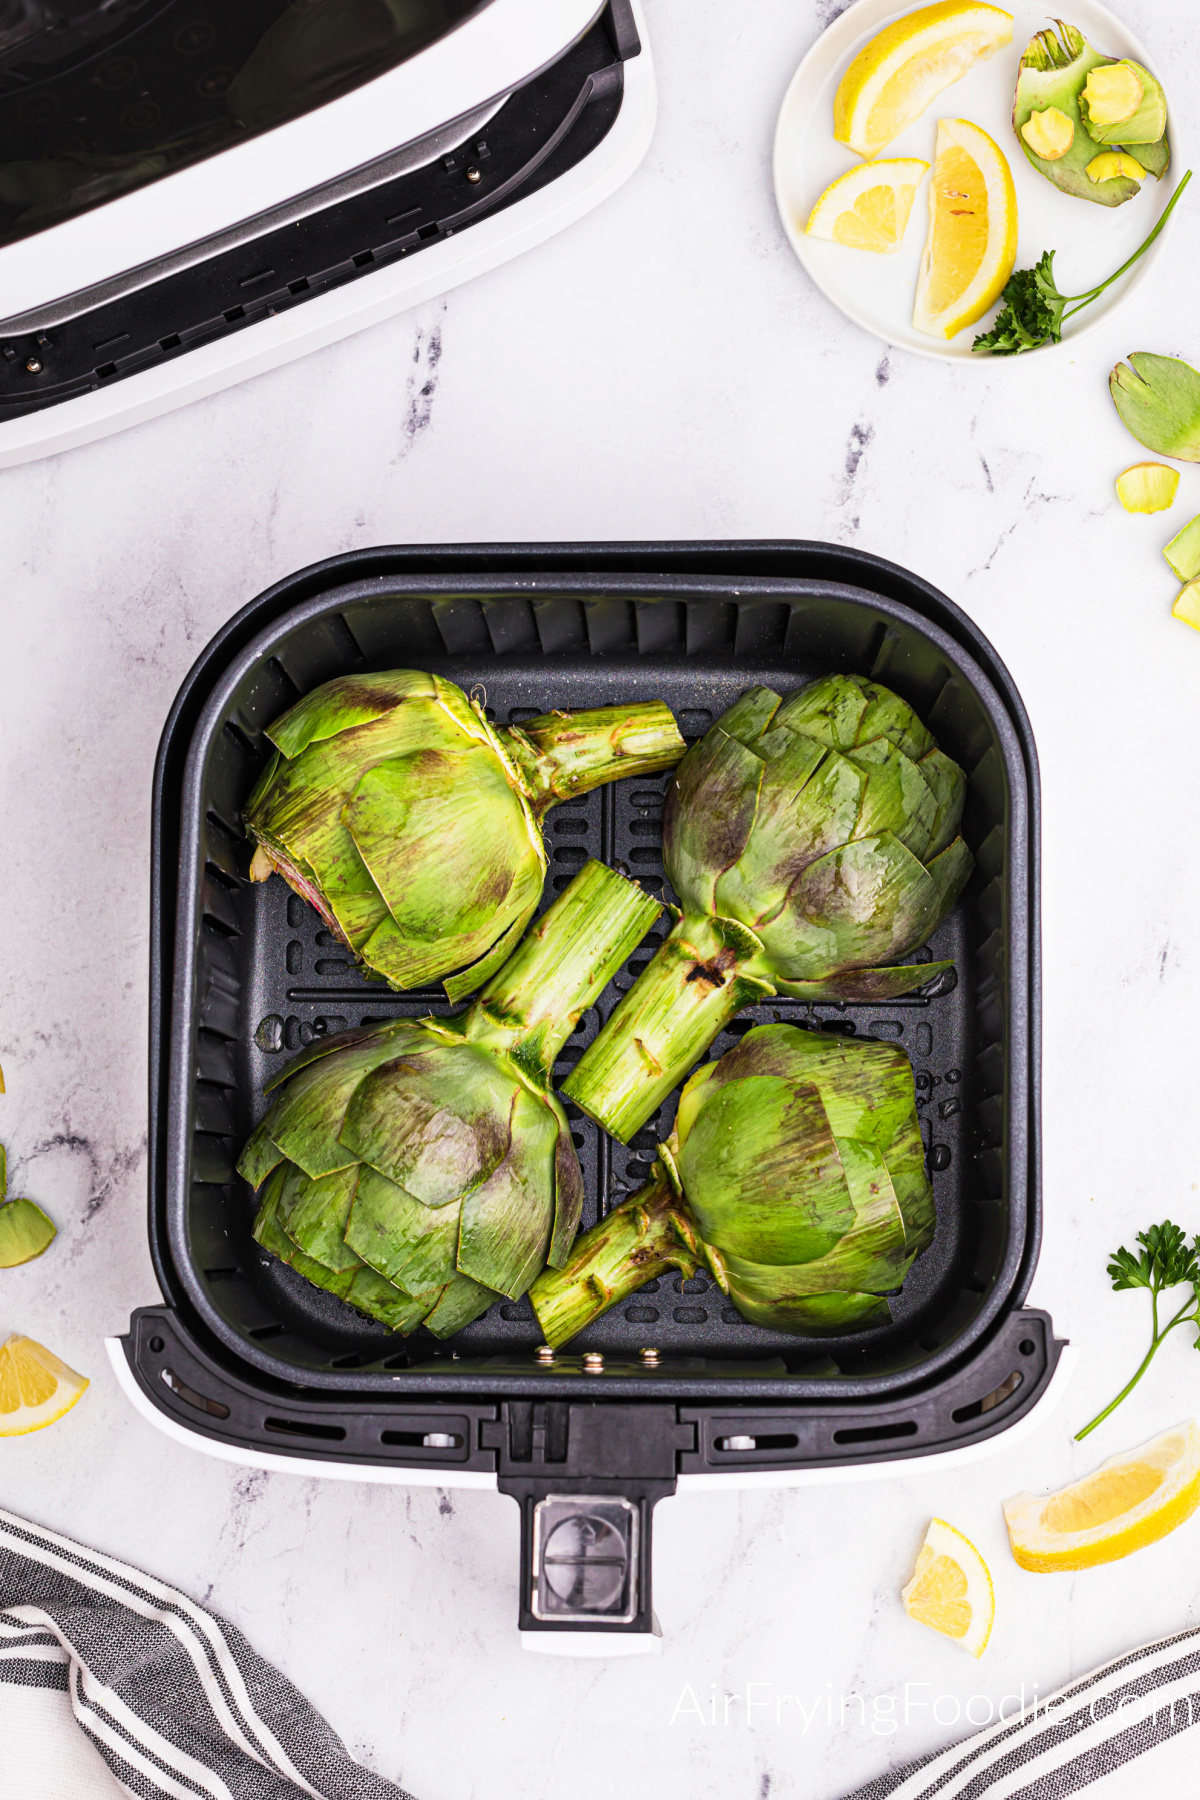 Artichoke halves placed face side down into the basket of the air fryer. Ready to cook.